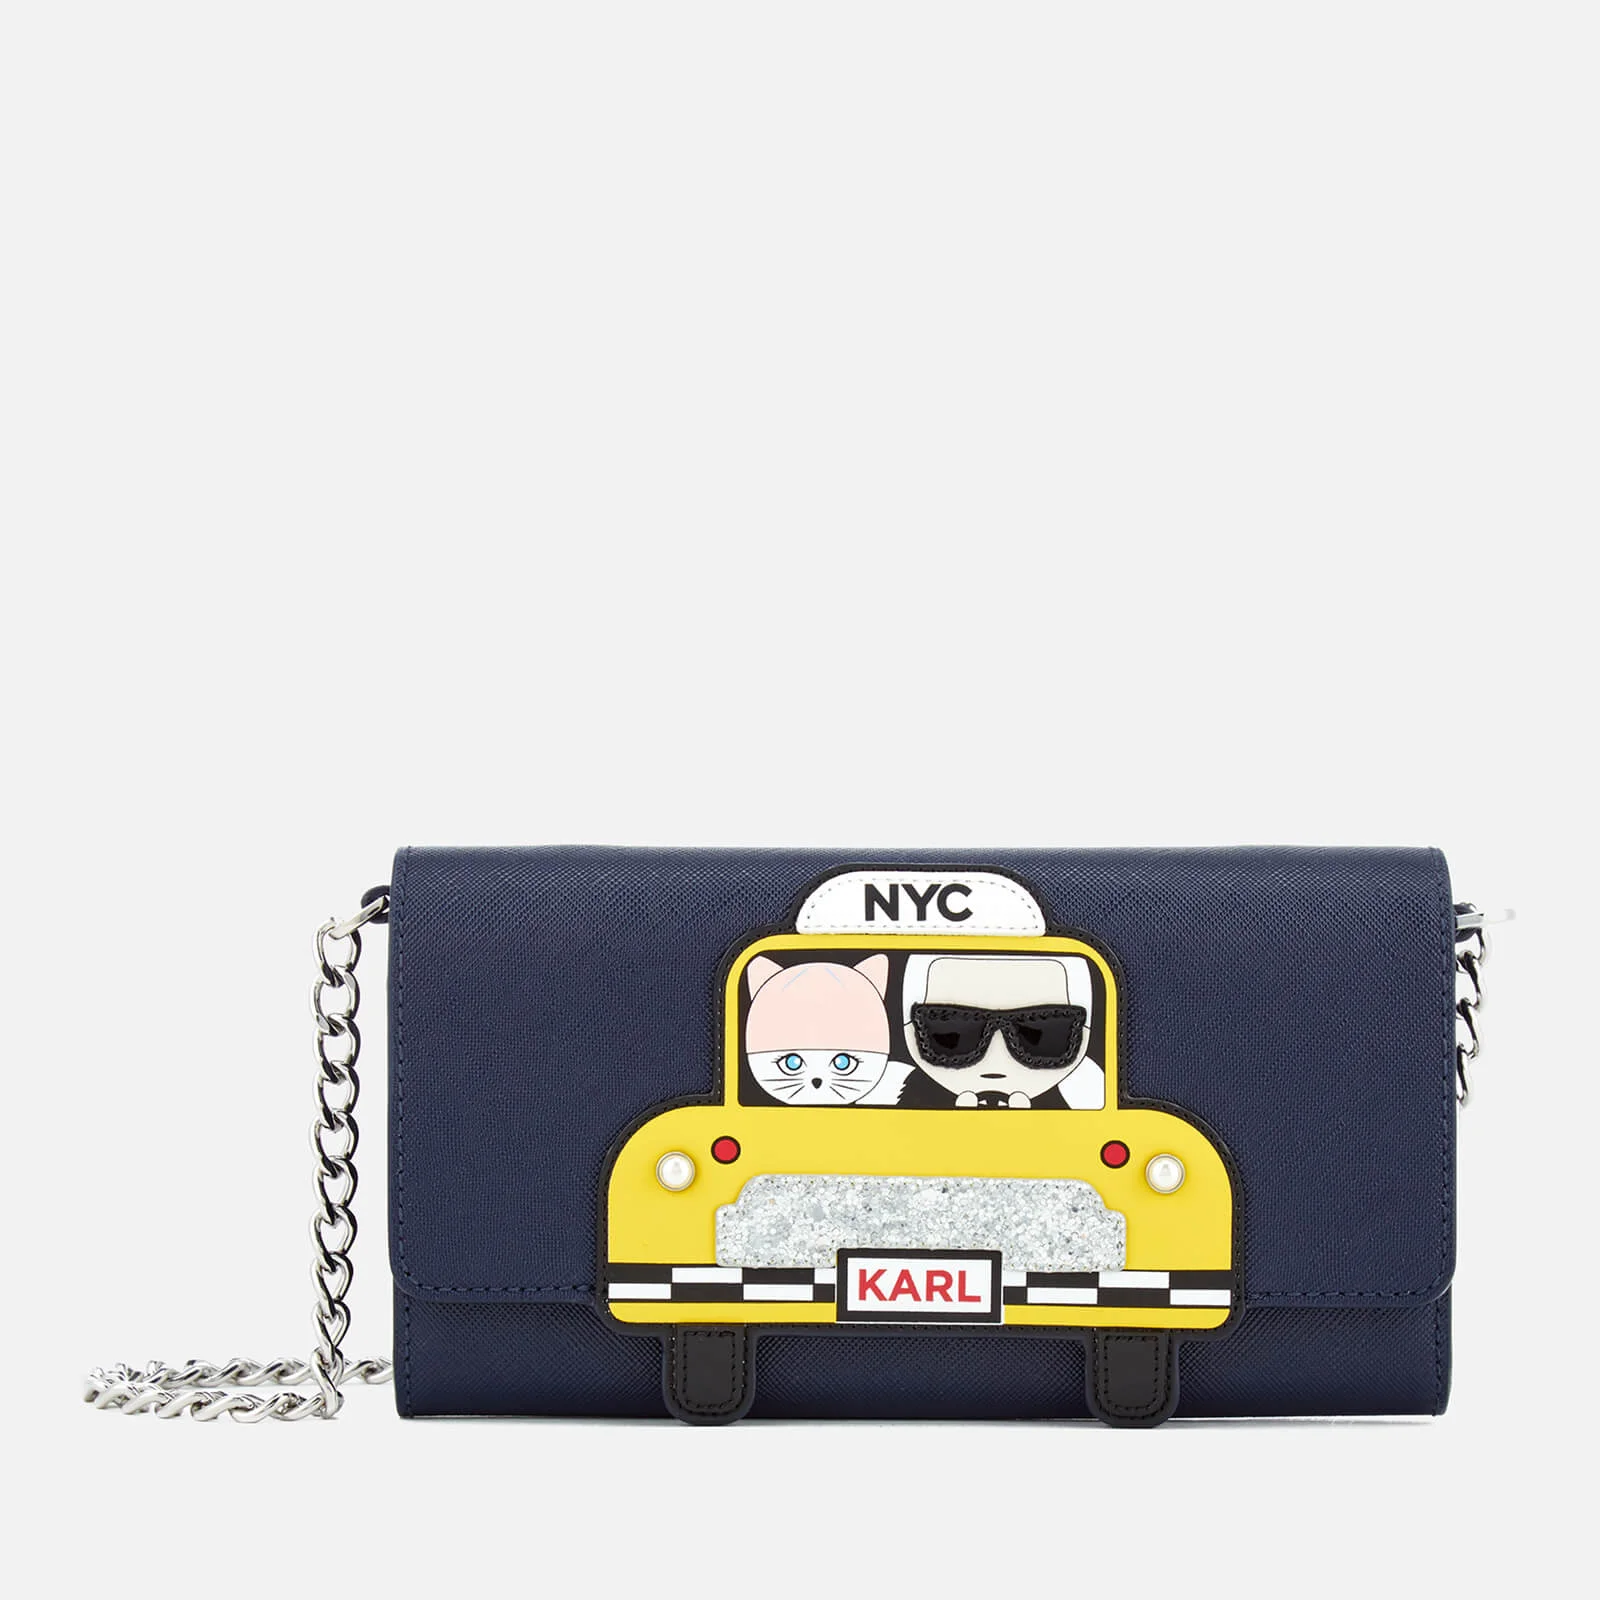 Karl Lagerfeld Women's Chain NYC Wallet - Navy Image 1